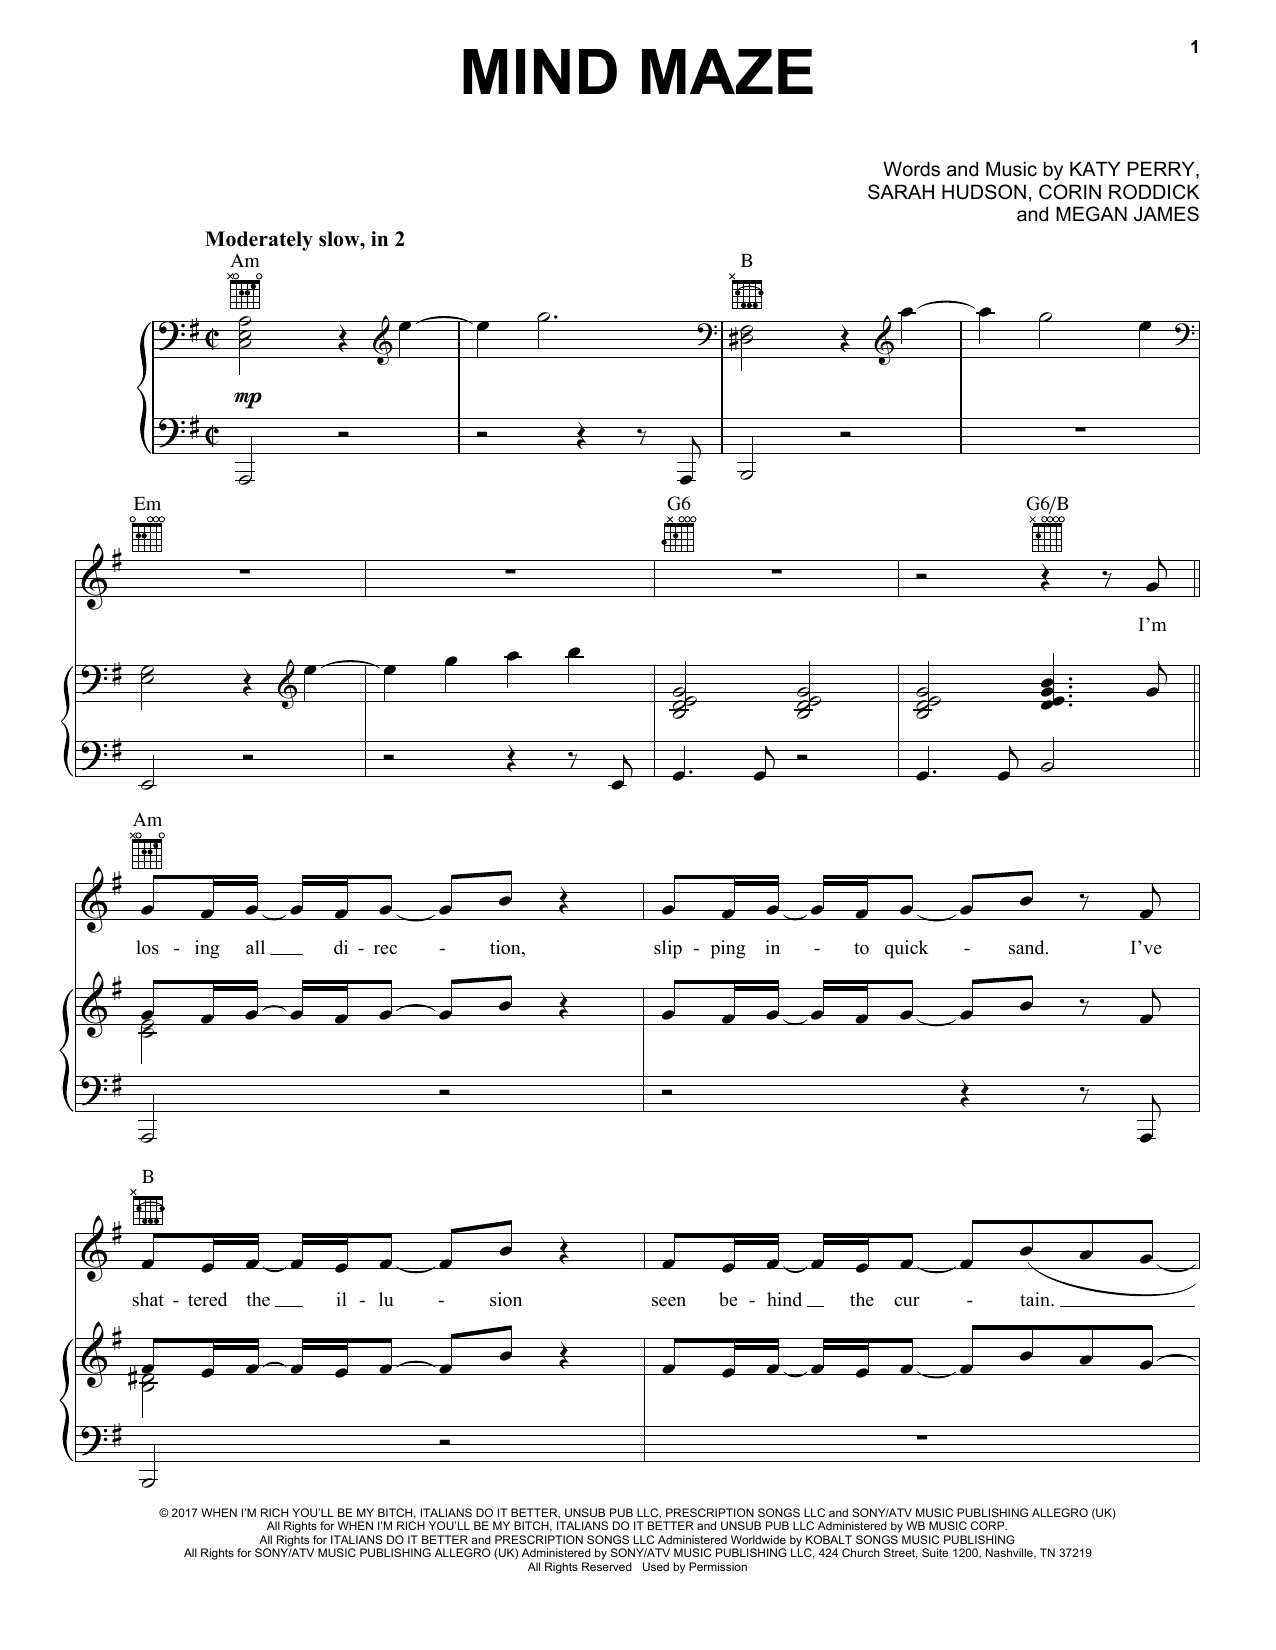 Download Katy Perry Mind Maze Sheet Music